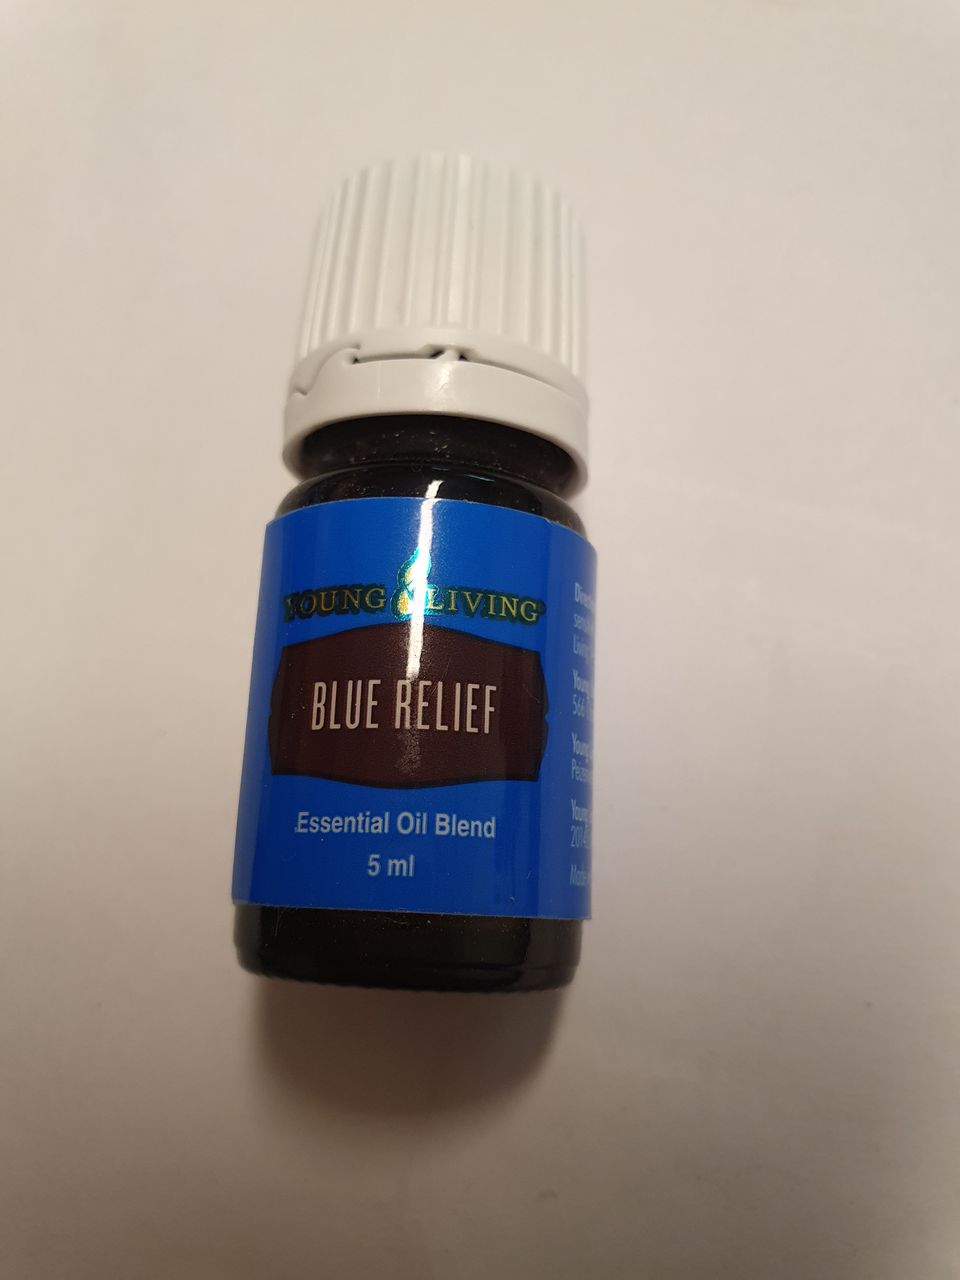 Young living Blue Relief